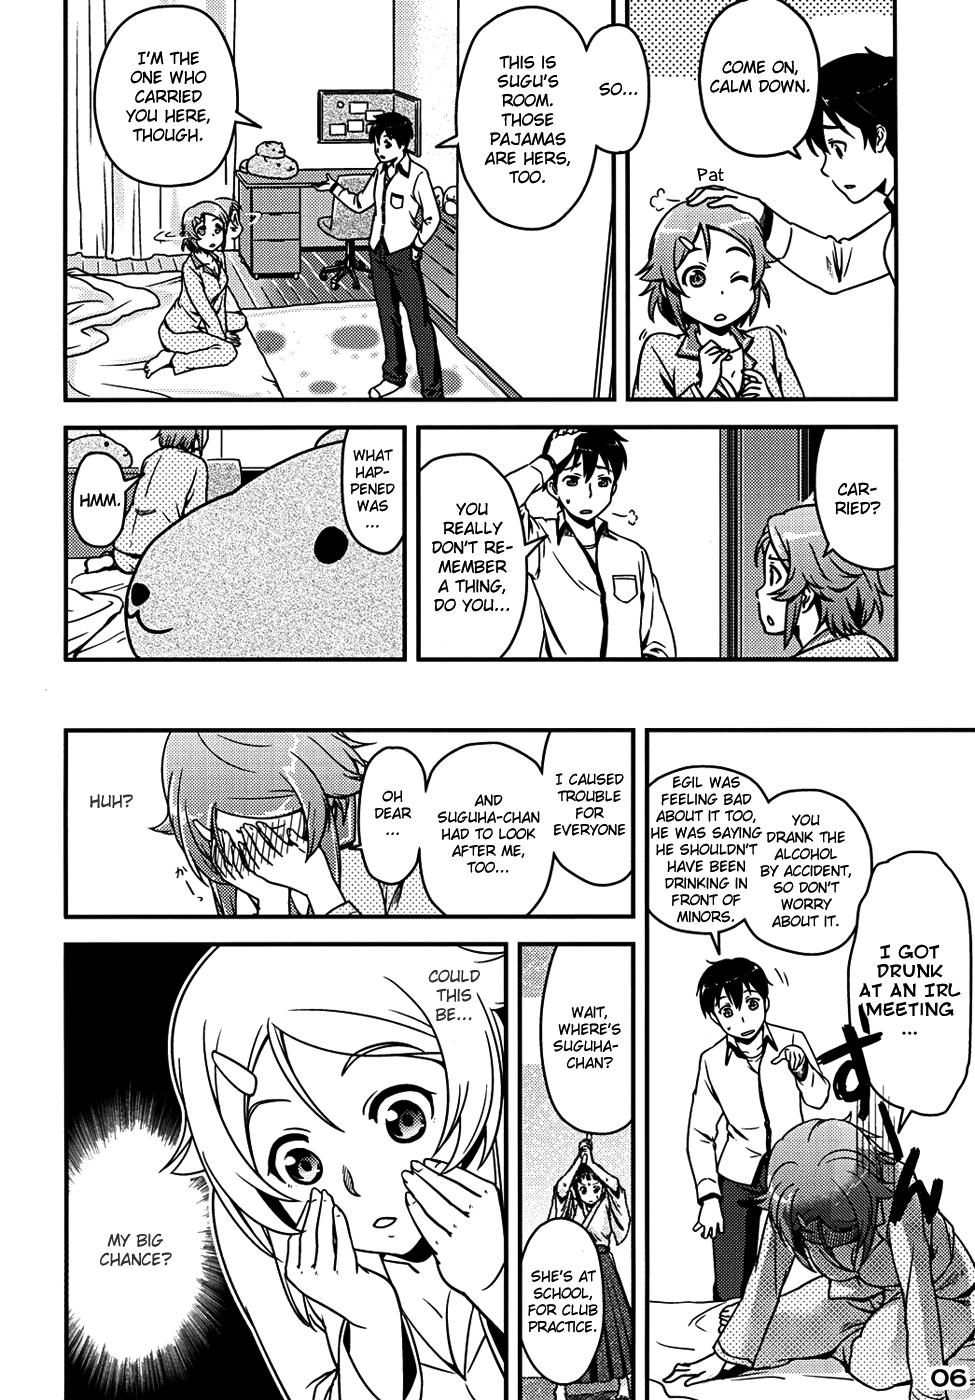 Sex Pussy RIZ ROUND2 - Sword art online Submission - Page 6